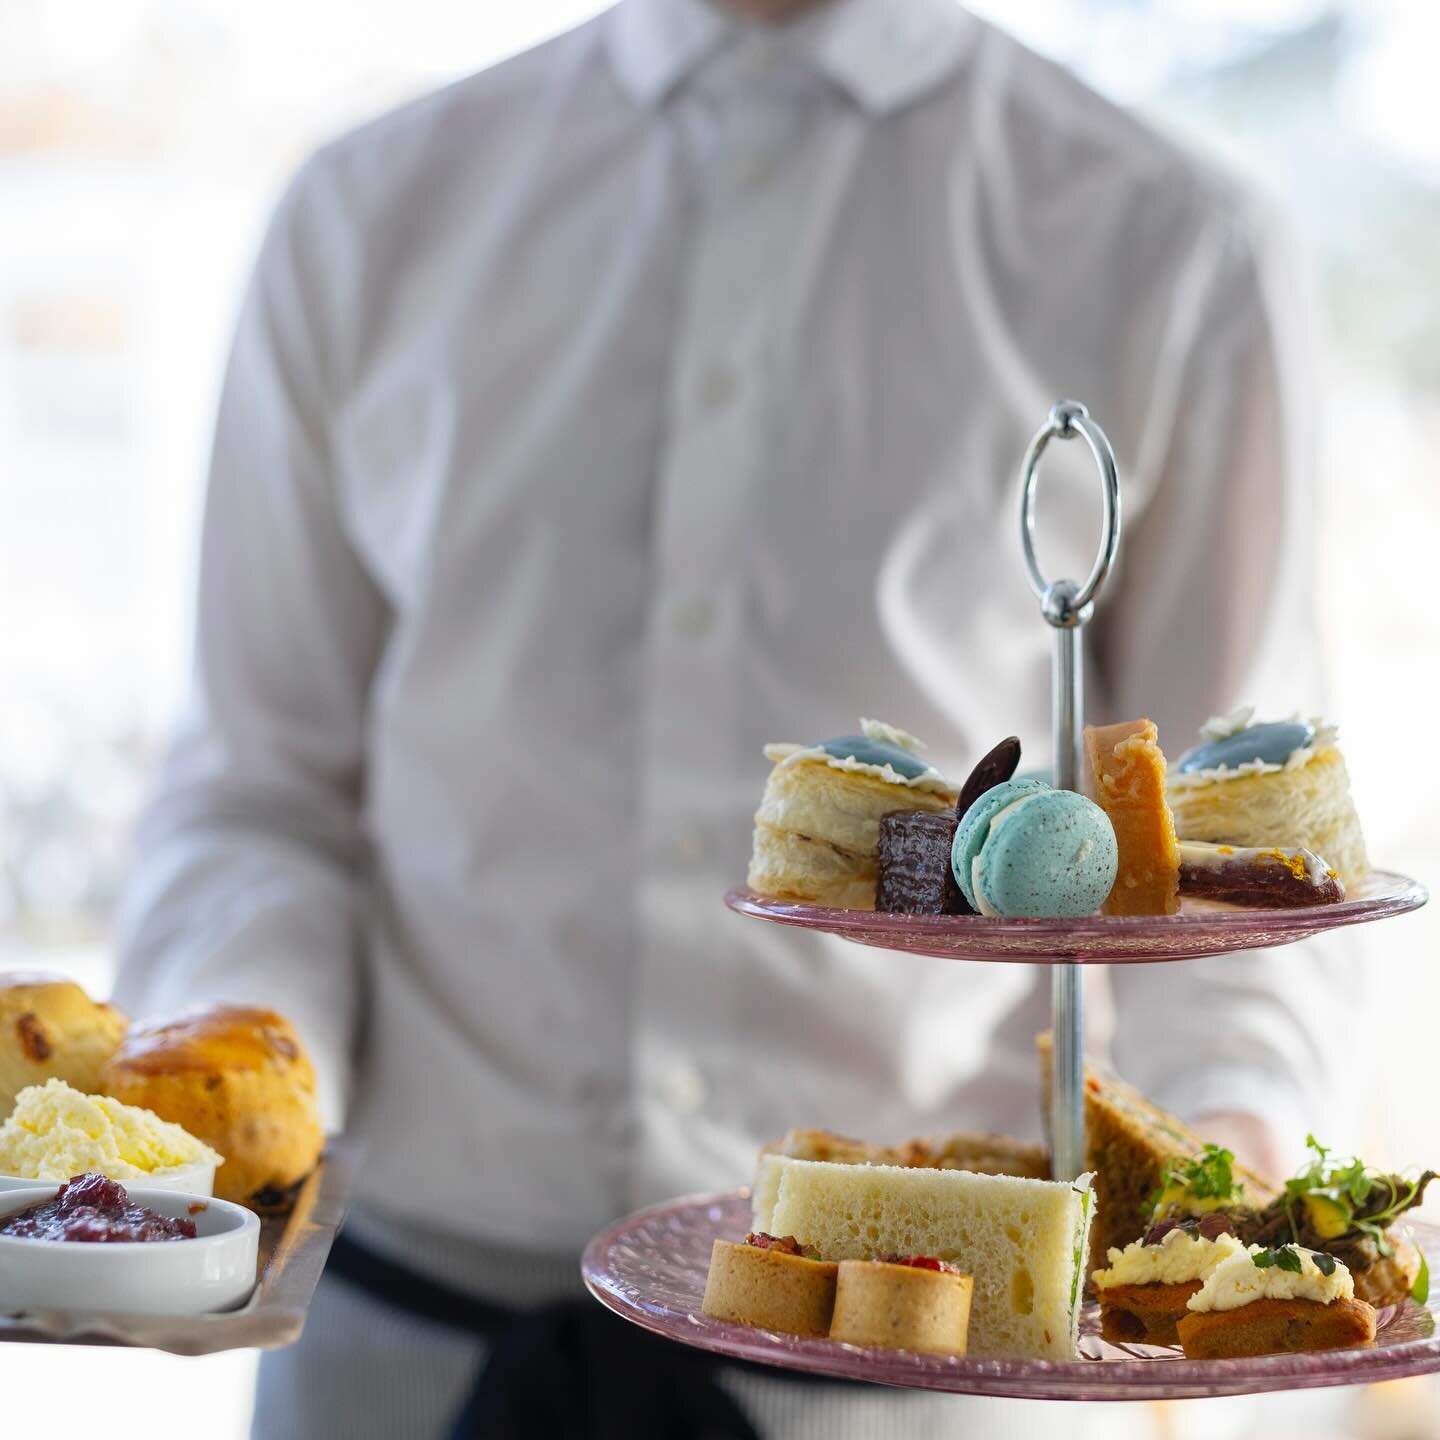 Easter Tea Time! Book your Afternoon Tea for the Easter weekend ~ Good Friday, Saturday and Easter Sunday from 1-4pm. 
🍋 Lemon &amp; Blueberry Tarts
🥒 Cucumber &amp; Cream Cheese Sandwiches 
🥧 Mini Chicken Pot Pie
🪺Robin Egg Macarons 
&hellip; an